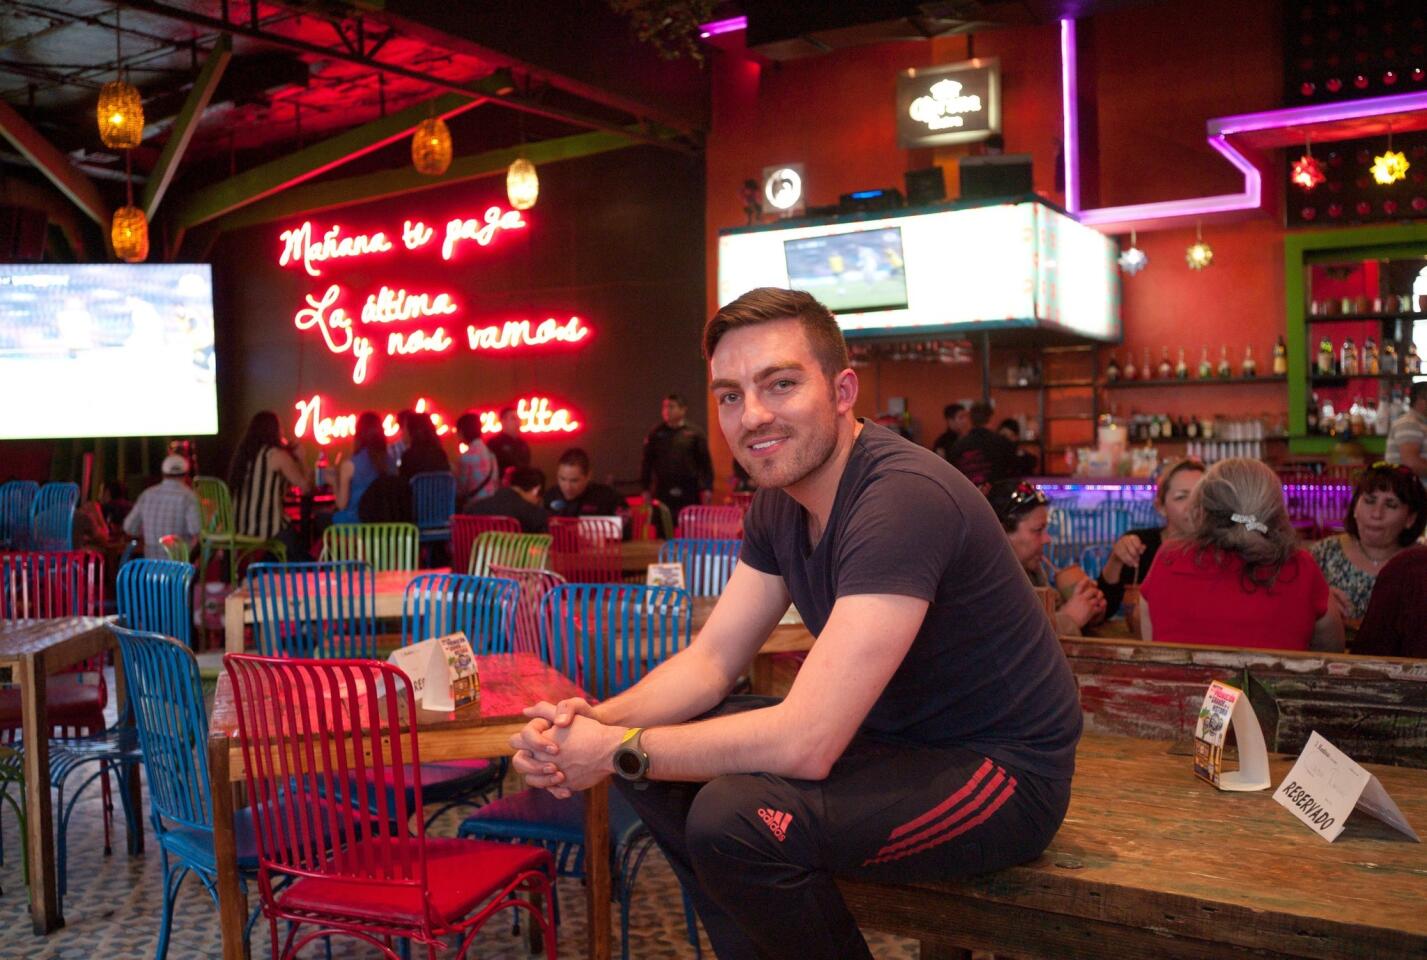 Angel Corral, 29, runs three bars in Ciudad Juarez, where nightlife has begun to return as residents feel safer amid a declining homicide rate. Juarez was until recently the deadliest city in Mexico. This nightclub is called Tres Mentiras (Three Lies).